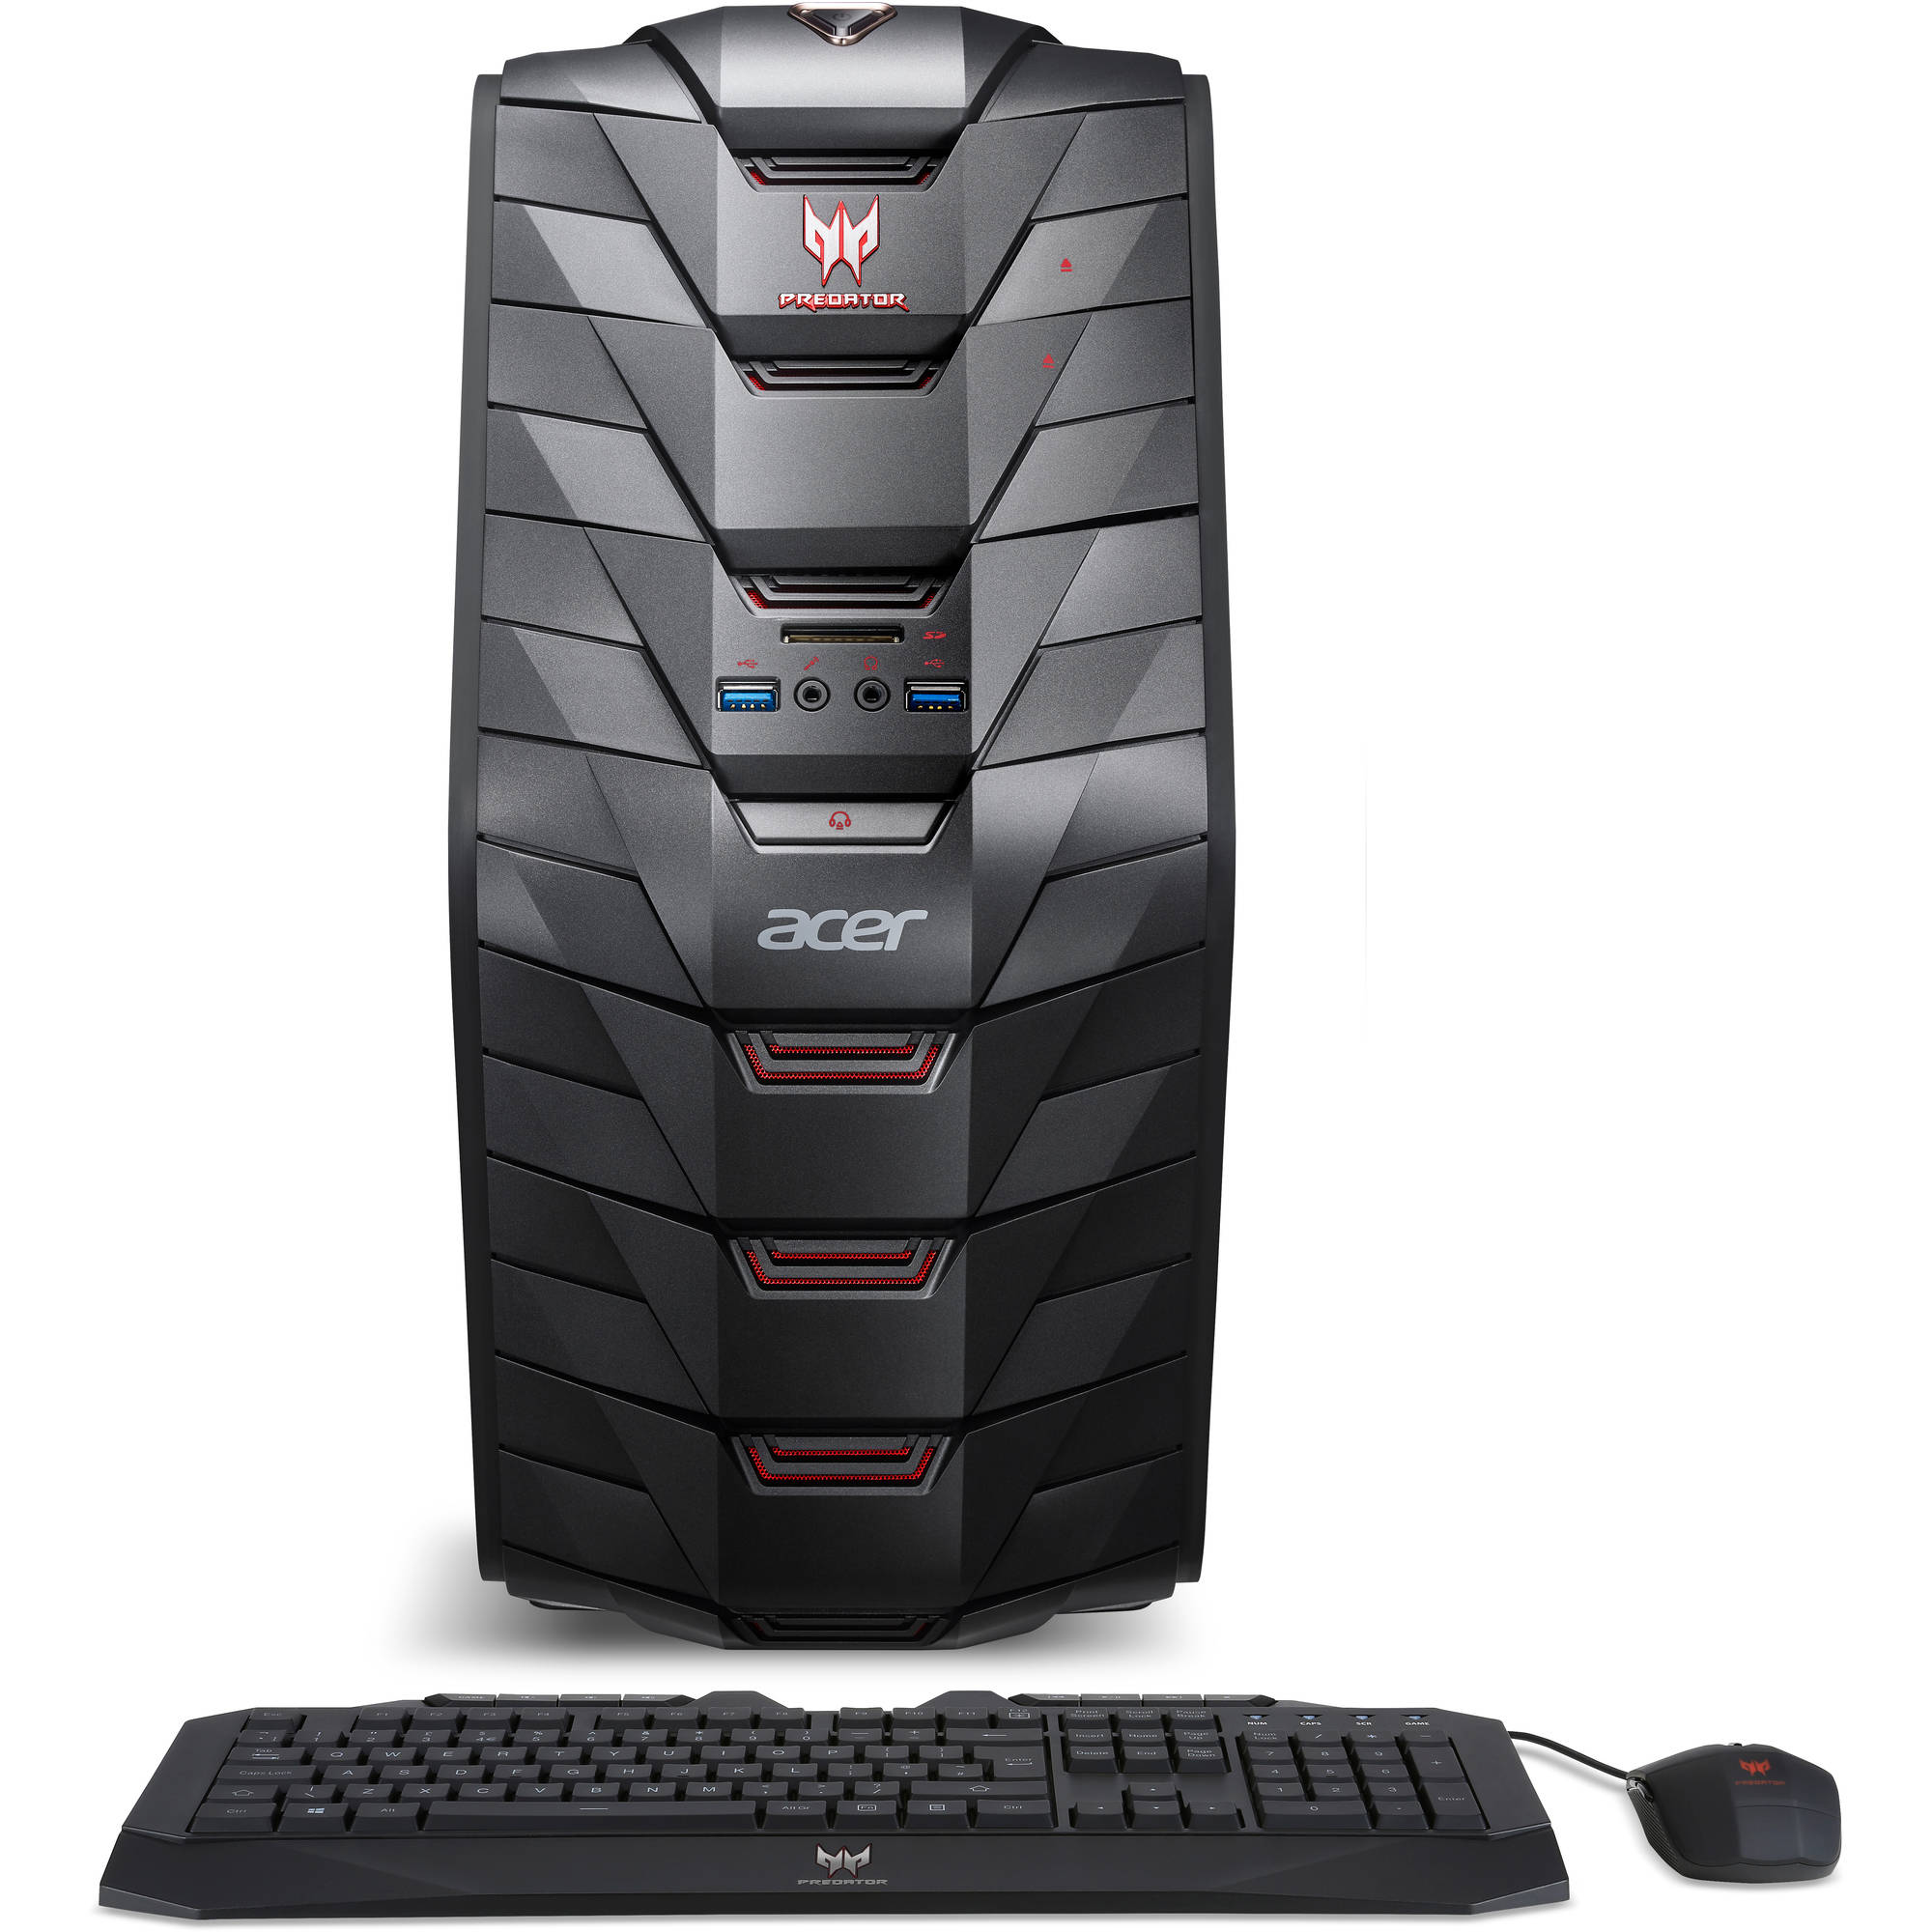 Acer Predator AG3-710-UW11 Desktop PC with Intel Core i5-6400 Processor, 8GB Memory, 1TB Hard Drive and Windows 10 Home (Monitor Not Included) - image 1 of 6